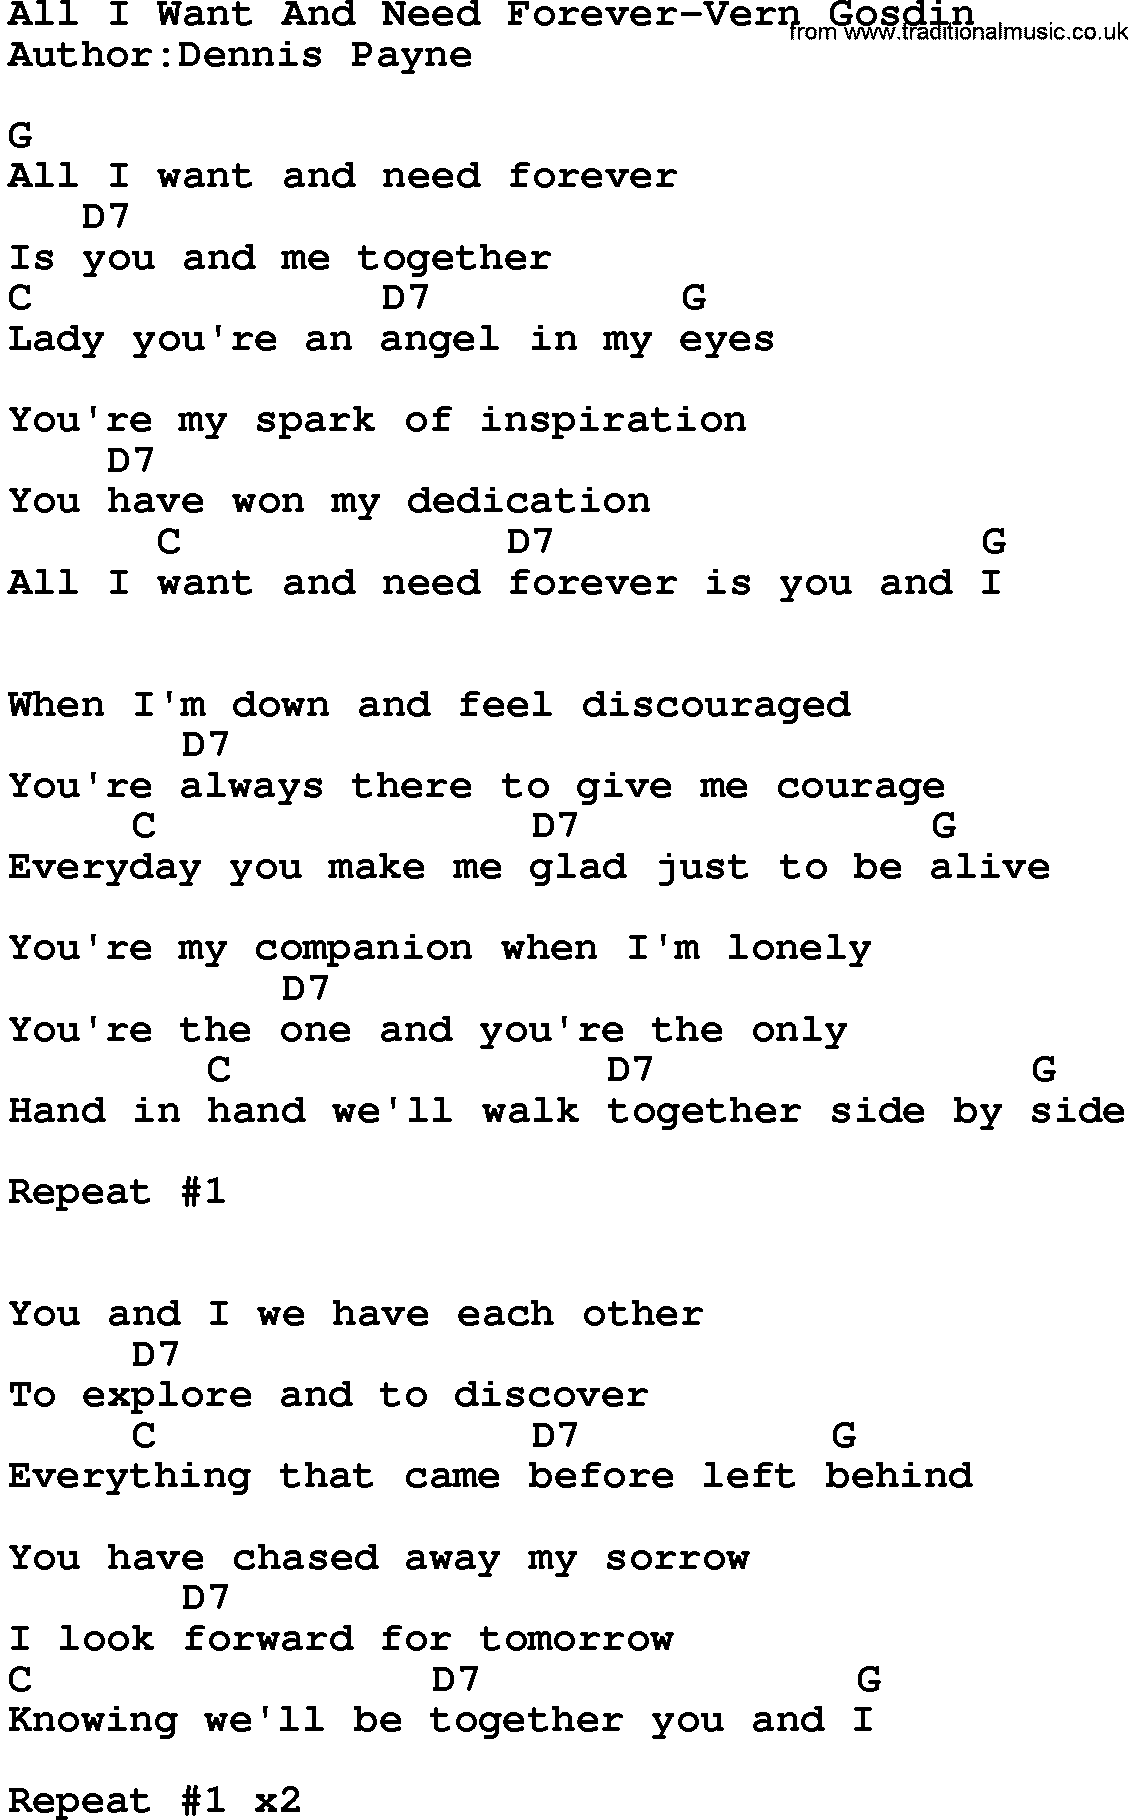 Country music song: All I Want And Need Forever-Vern Gosdin lyrics and chords